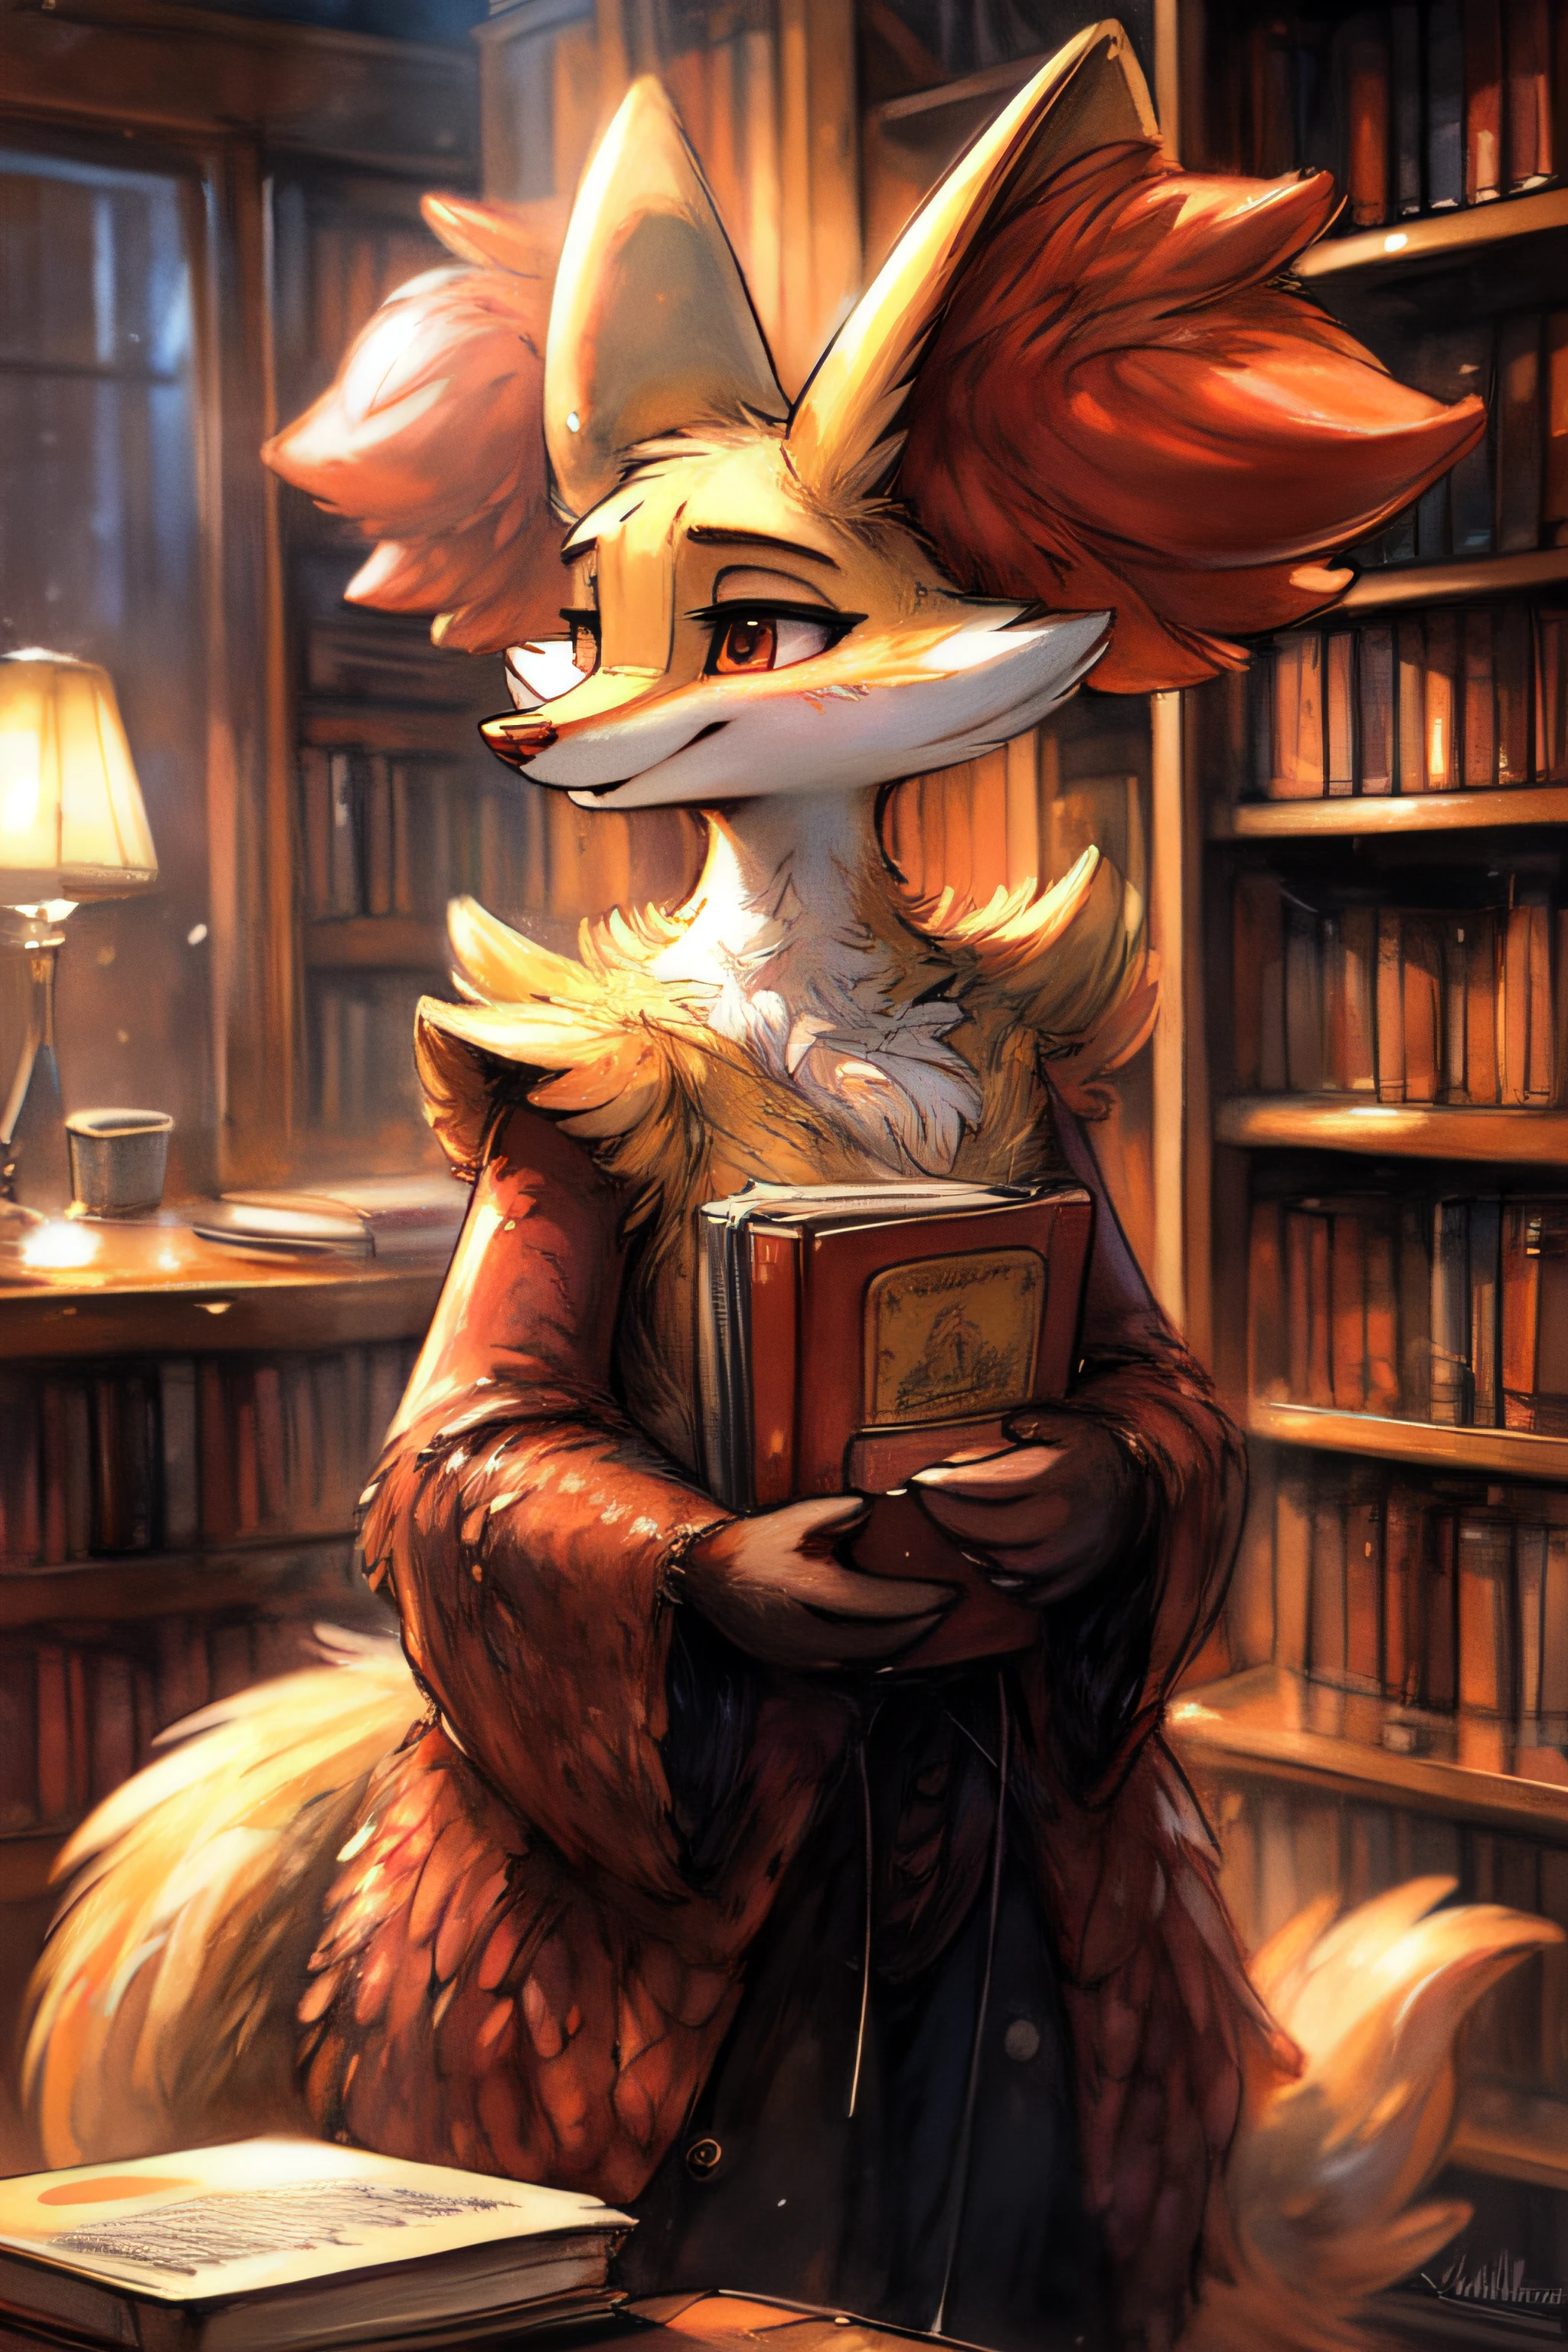 masterpiece, best quality,uploaded on e621, ((by Yurusa, by Childe Hassam, by Kenket, by Kyoto Animation)), sharp details, (best quality), dramatic lighting,
Woman, wide hips,
Thick
library,librarian,books
From the side,
FurryCore
Delphox